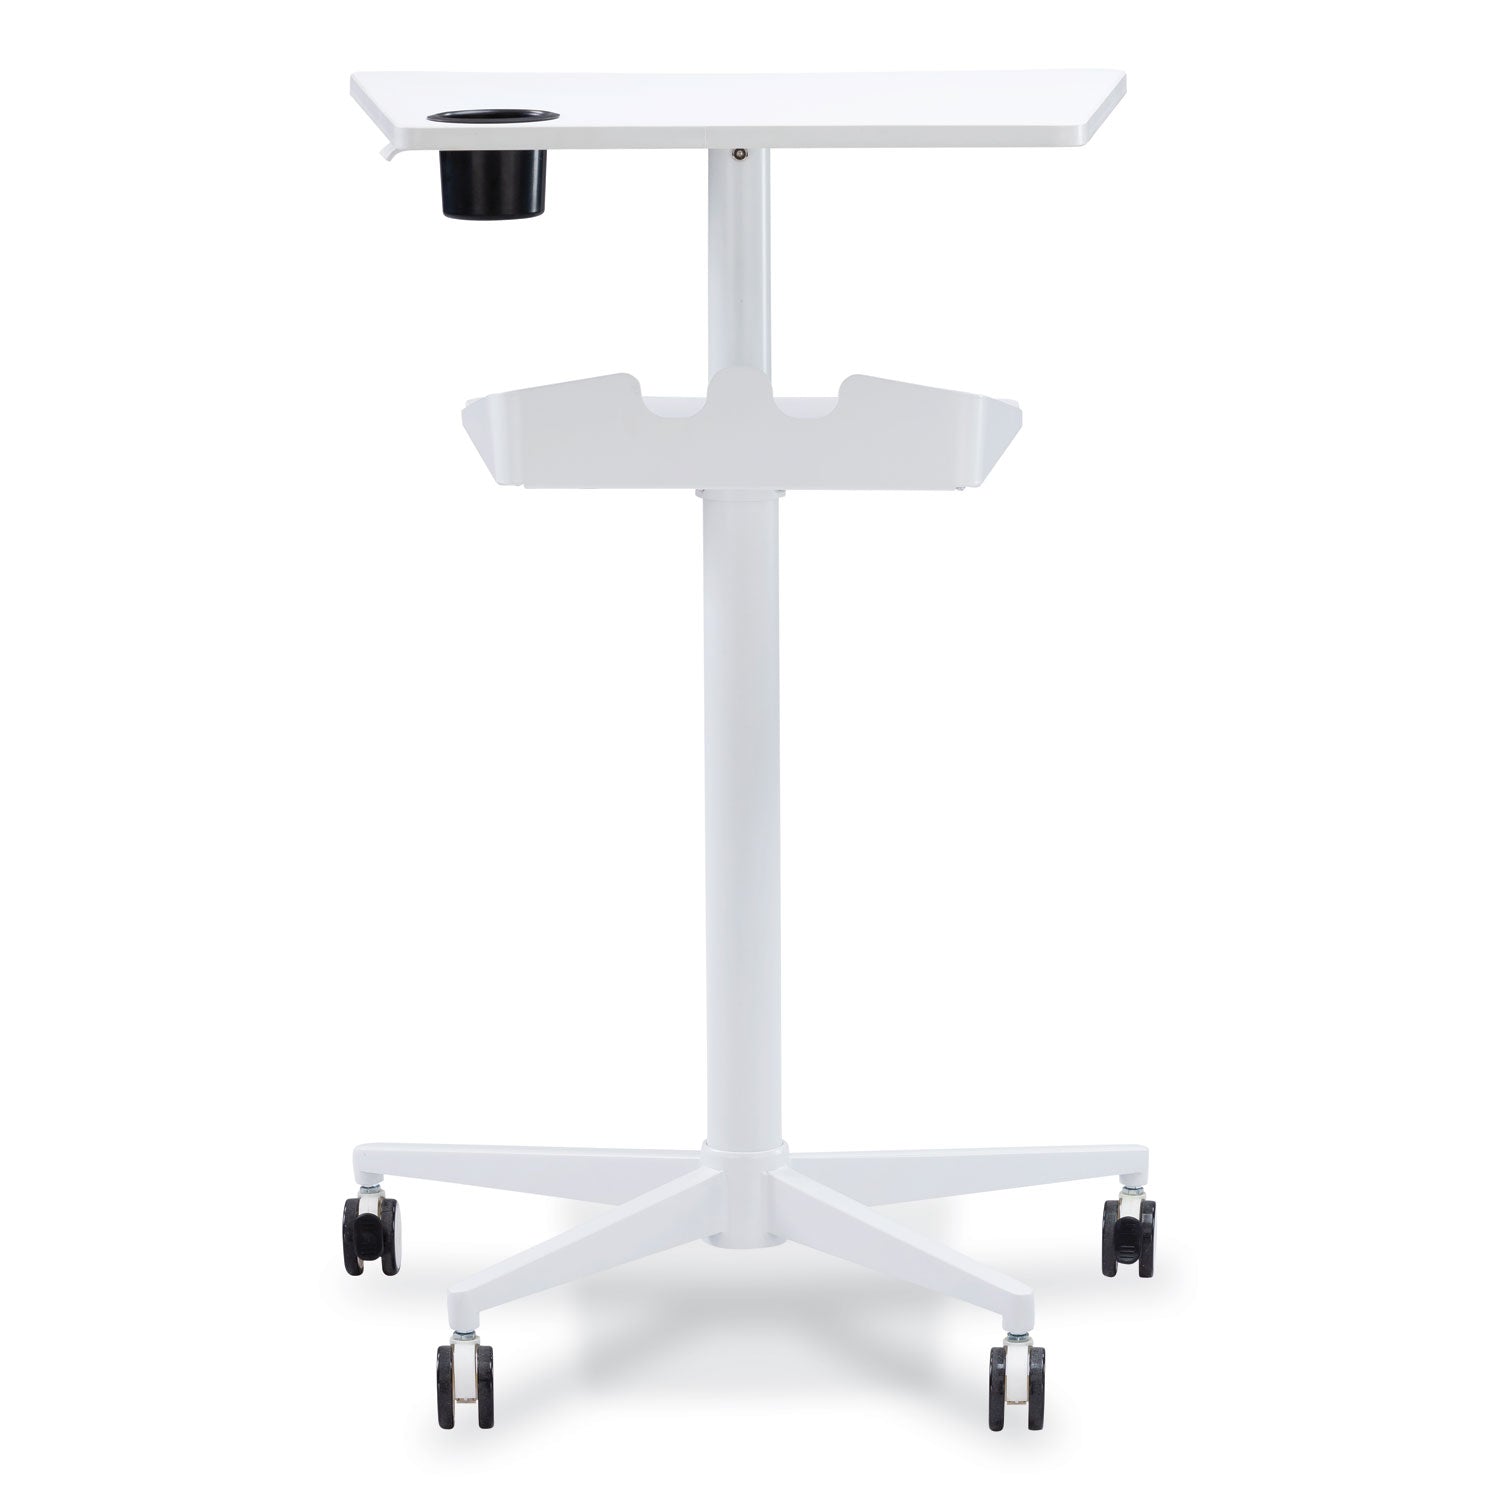 Safco Active Collection Vum Mobile Workstation - 25.3" x 19.8"47.8" - 2 Shelve(s) - Finish: White - 4